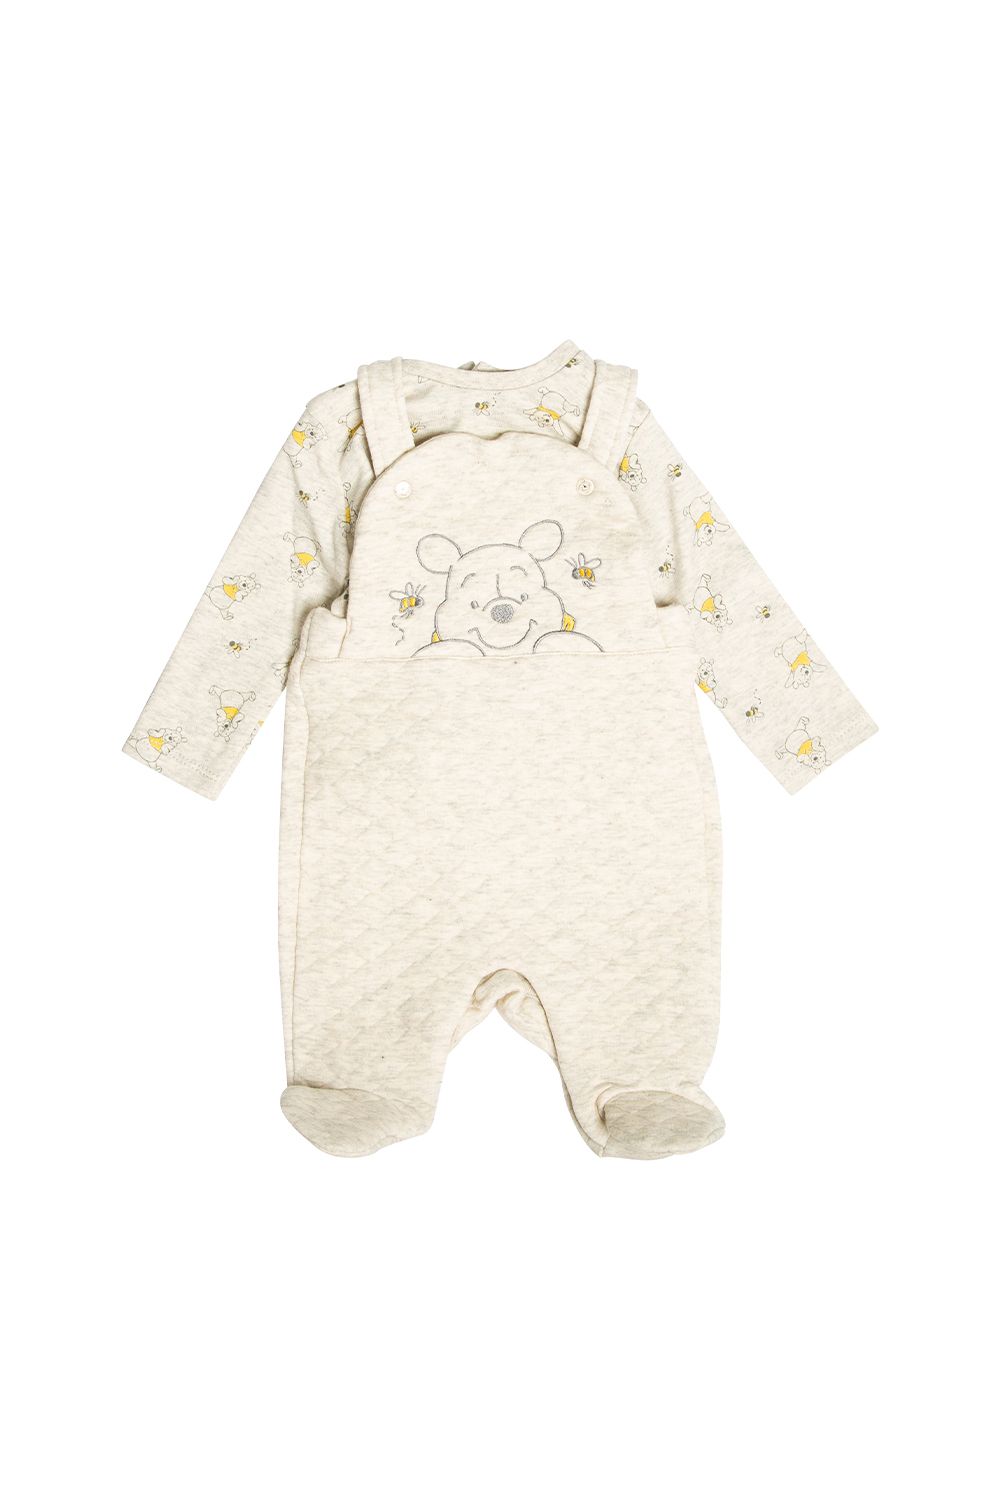 This adorable Disney Baby two-piece set features a Winnie the Pooh print. The set comes with an all-over printed, long sleeve top and a pair of quilted, footed dungarees. Both the top and dungarees are cotton, with popper fastenings, keeping your little one comfortable. This would make a lovely new addition to your little ones wardrobe!